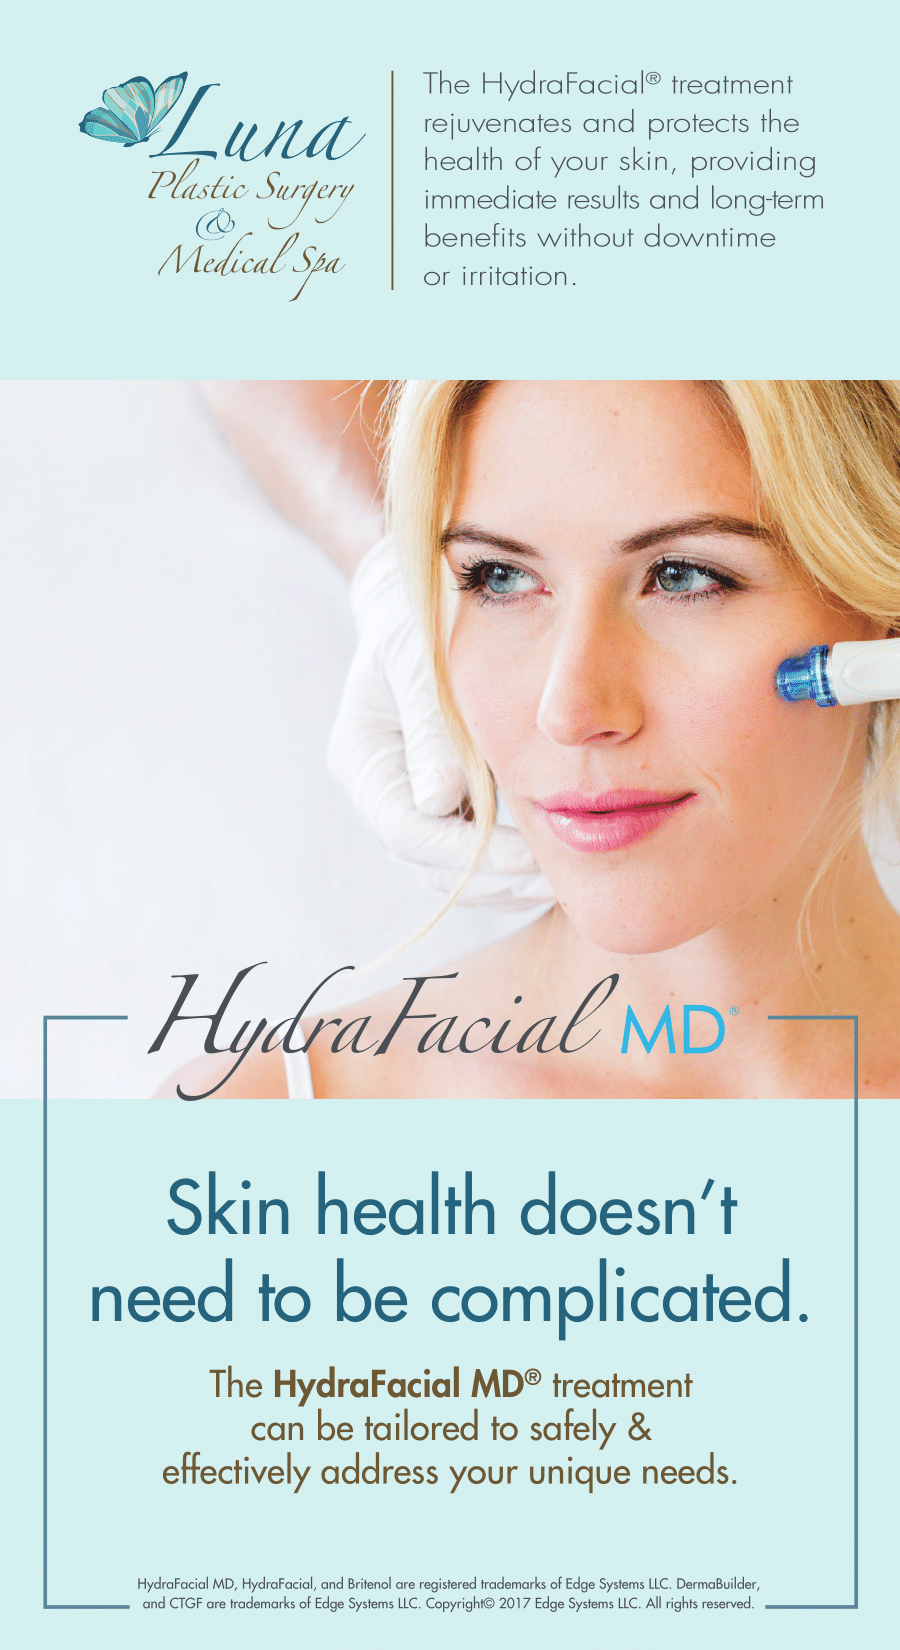 Price sheet for the HydraFacial procedure